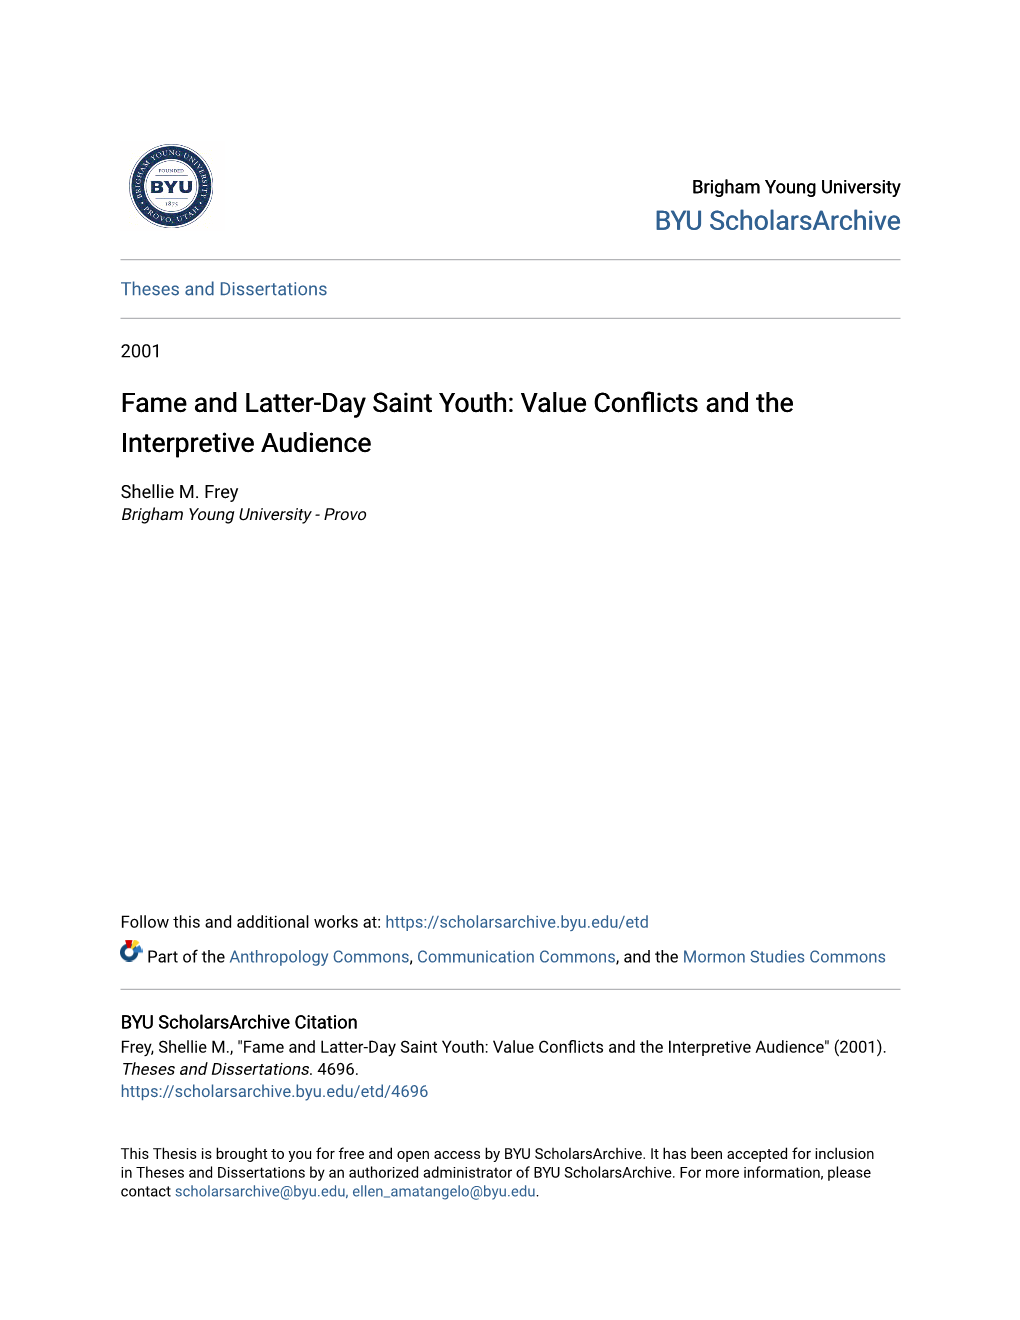 Fame and Latter-Day Saint Youth: Value Conflicts and the Interpretive Audience